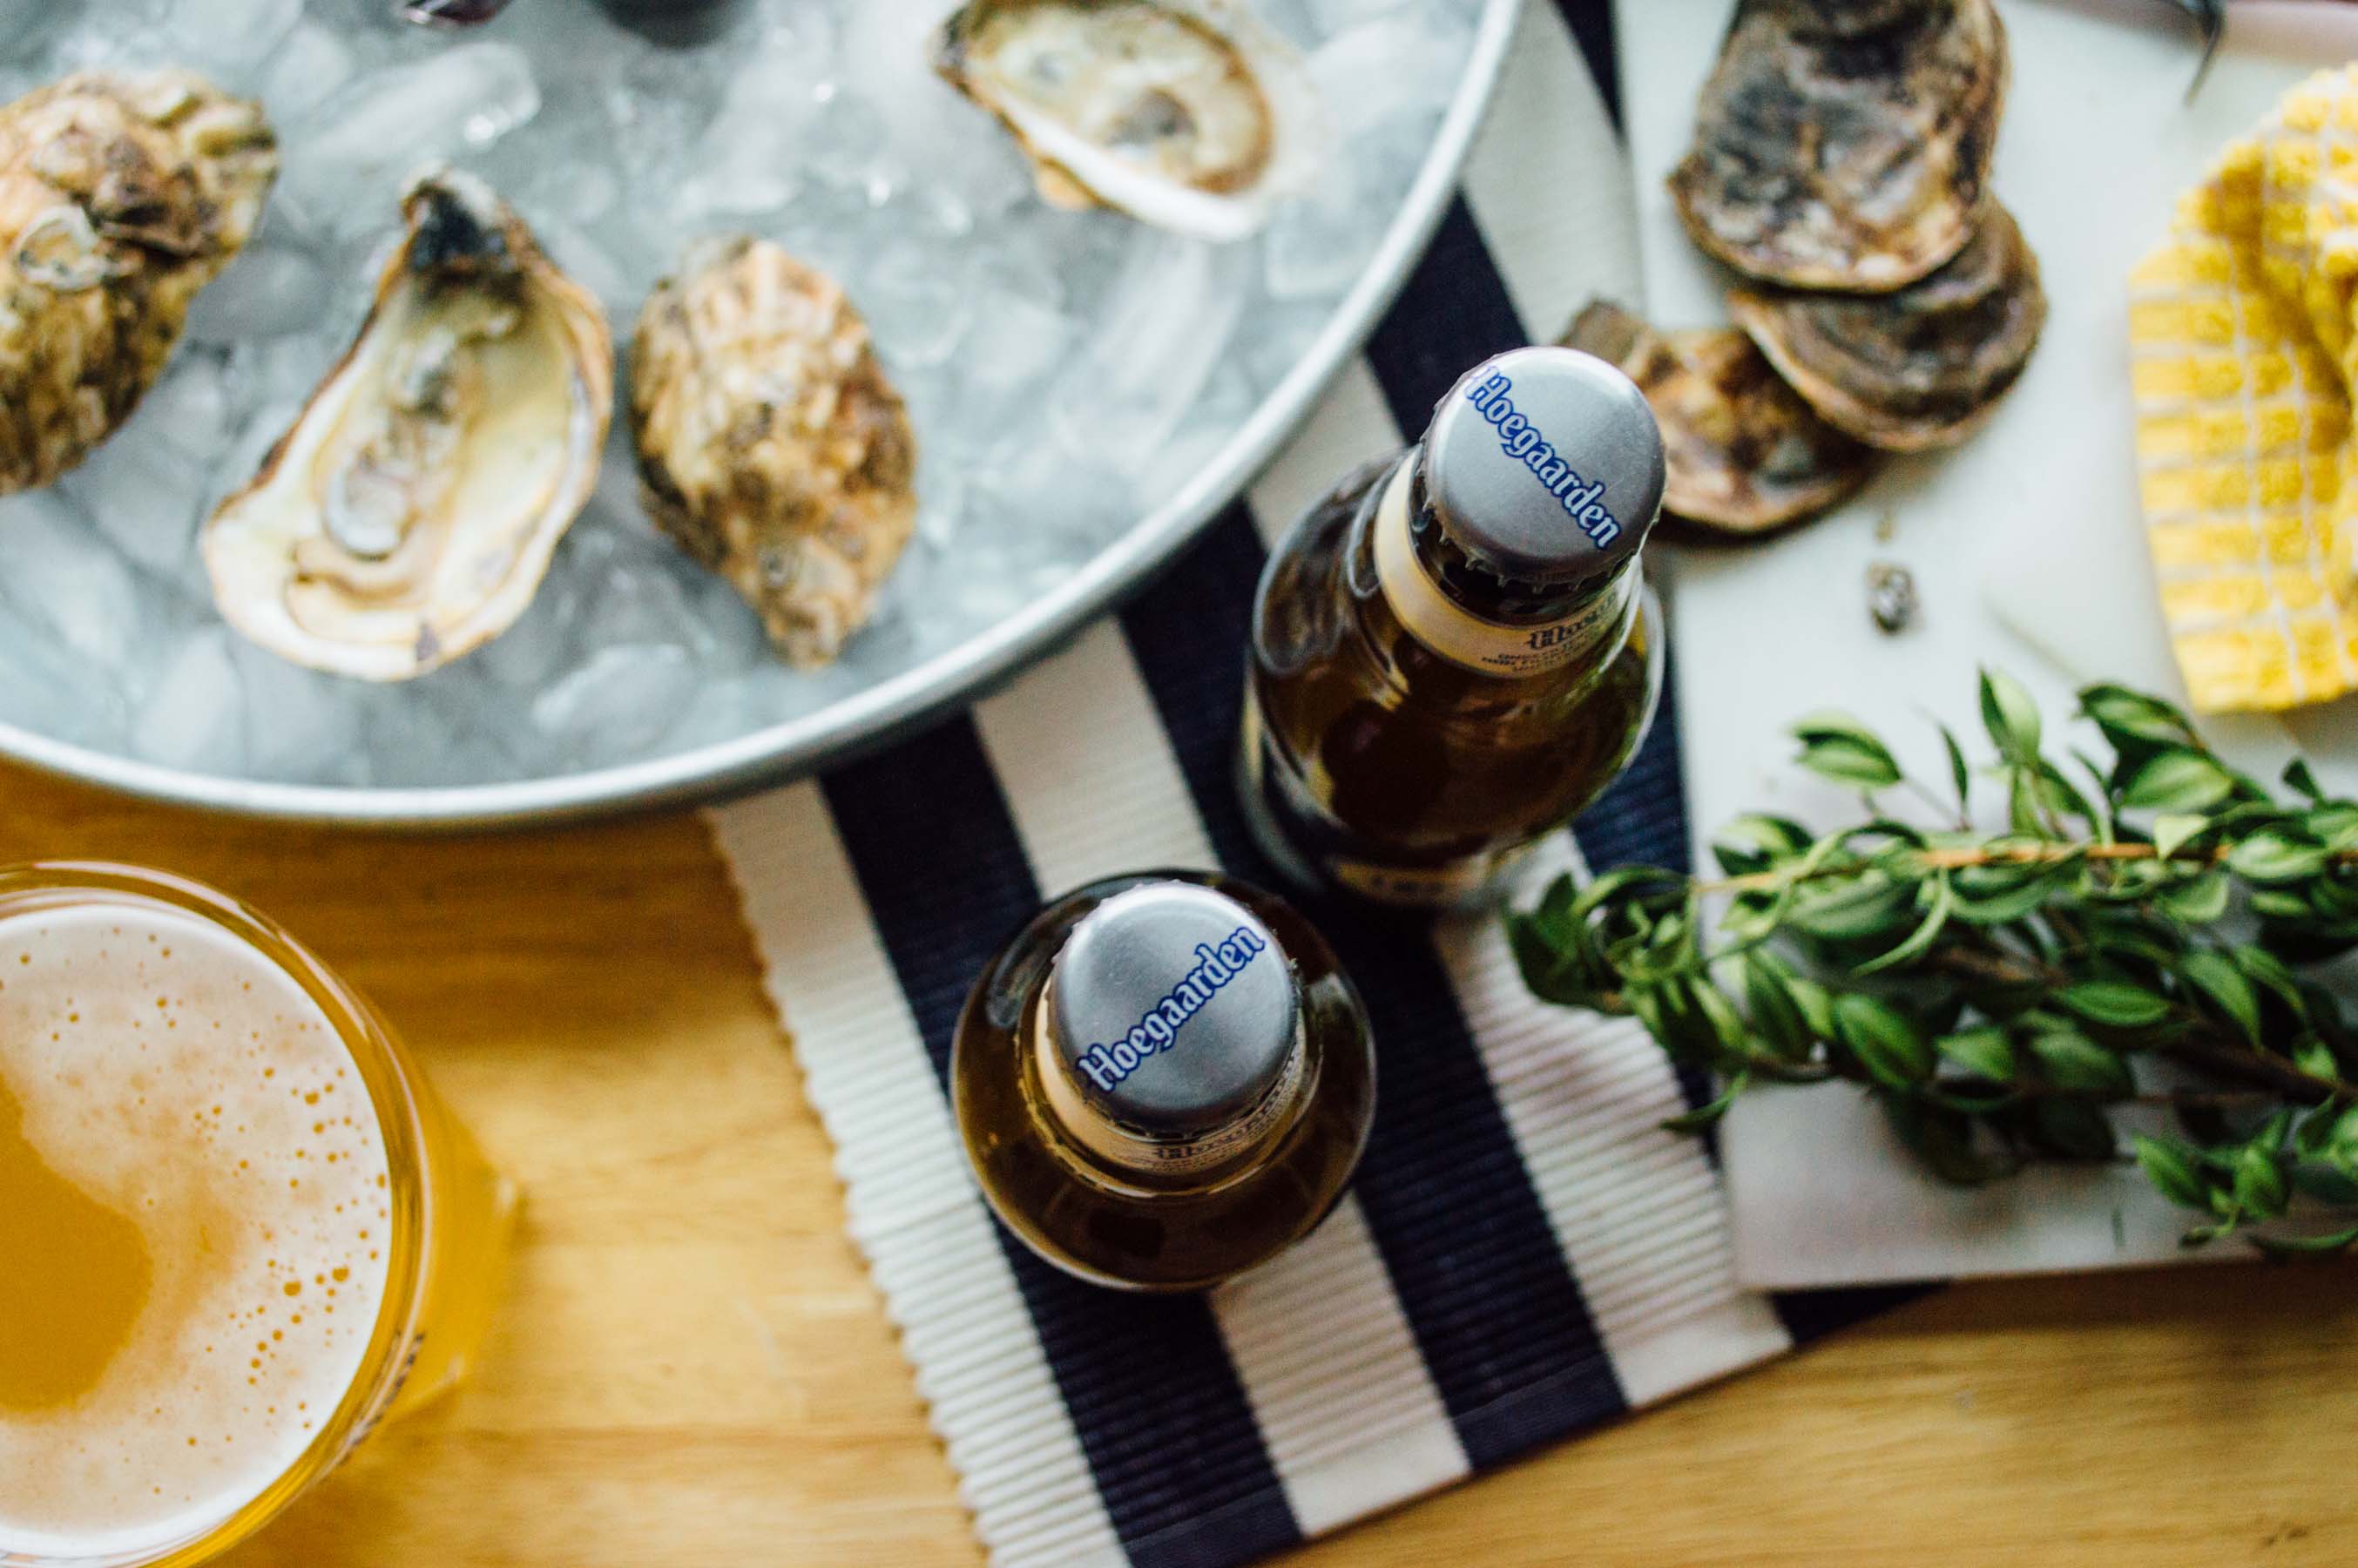 Pair Hoegaarden with your freshly shucked oysters for an indoor oyster fest! | bygabriella.co